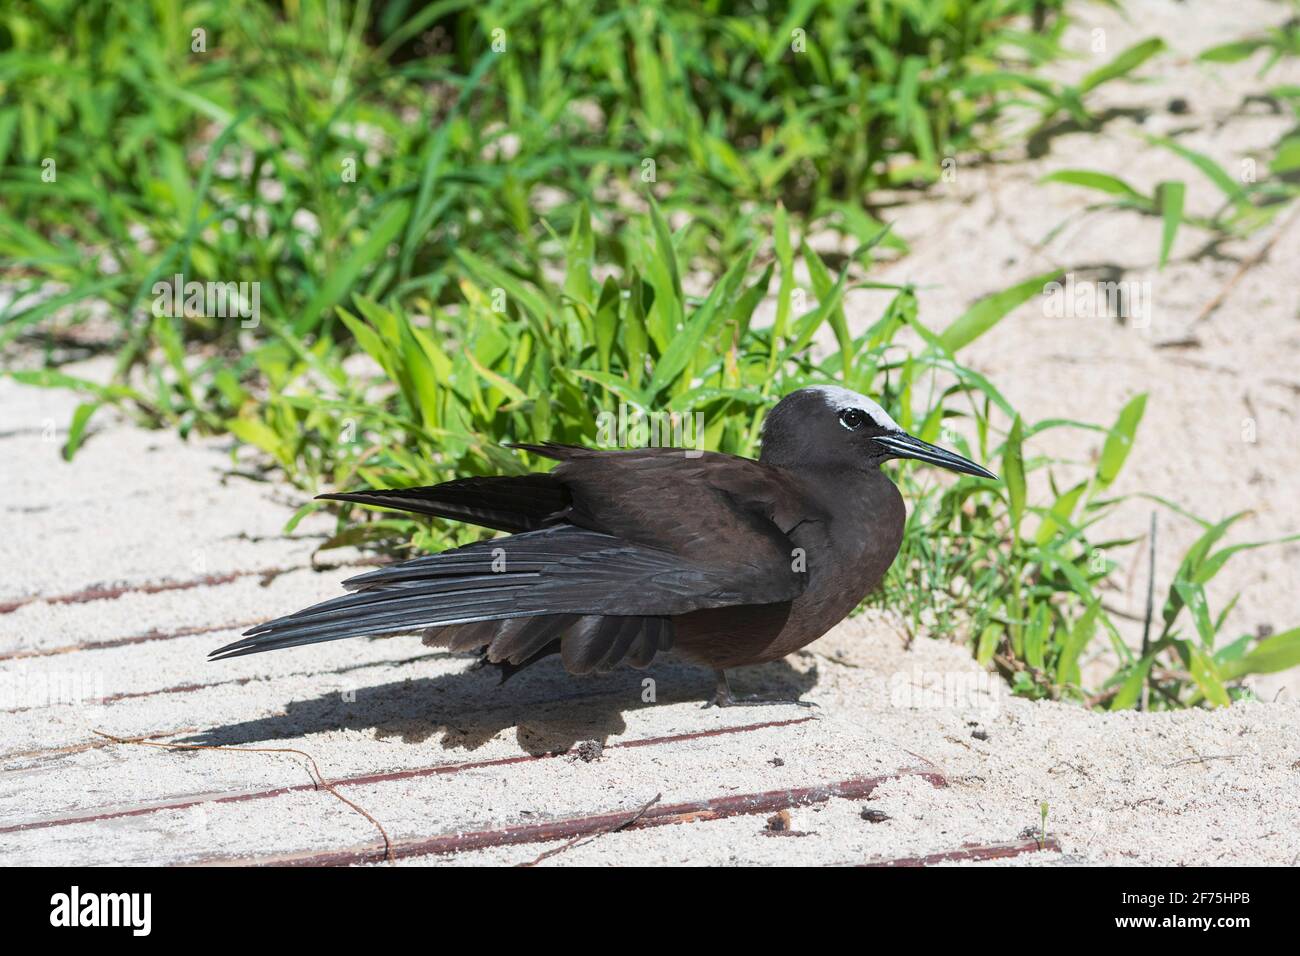 A White-capped Noddy (Anous minutus) sunbathing, Heron Island, Southern Great Barrier Reef, Queensland, QLD, Australia Stock Photo